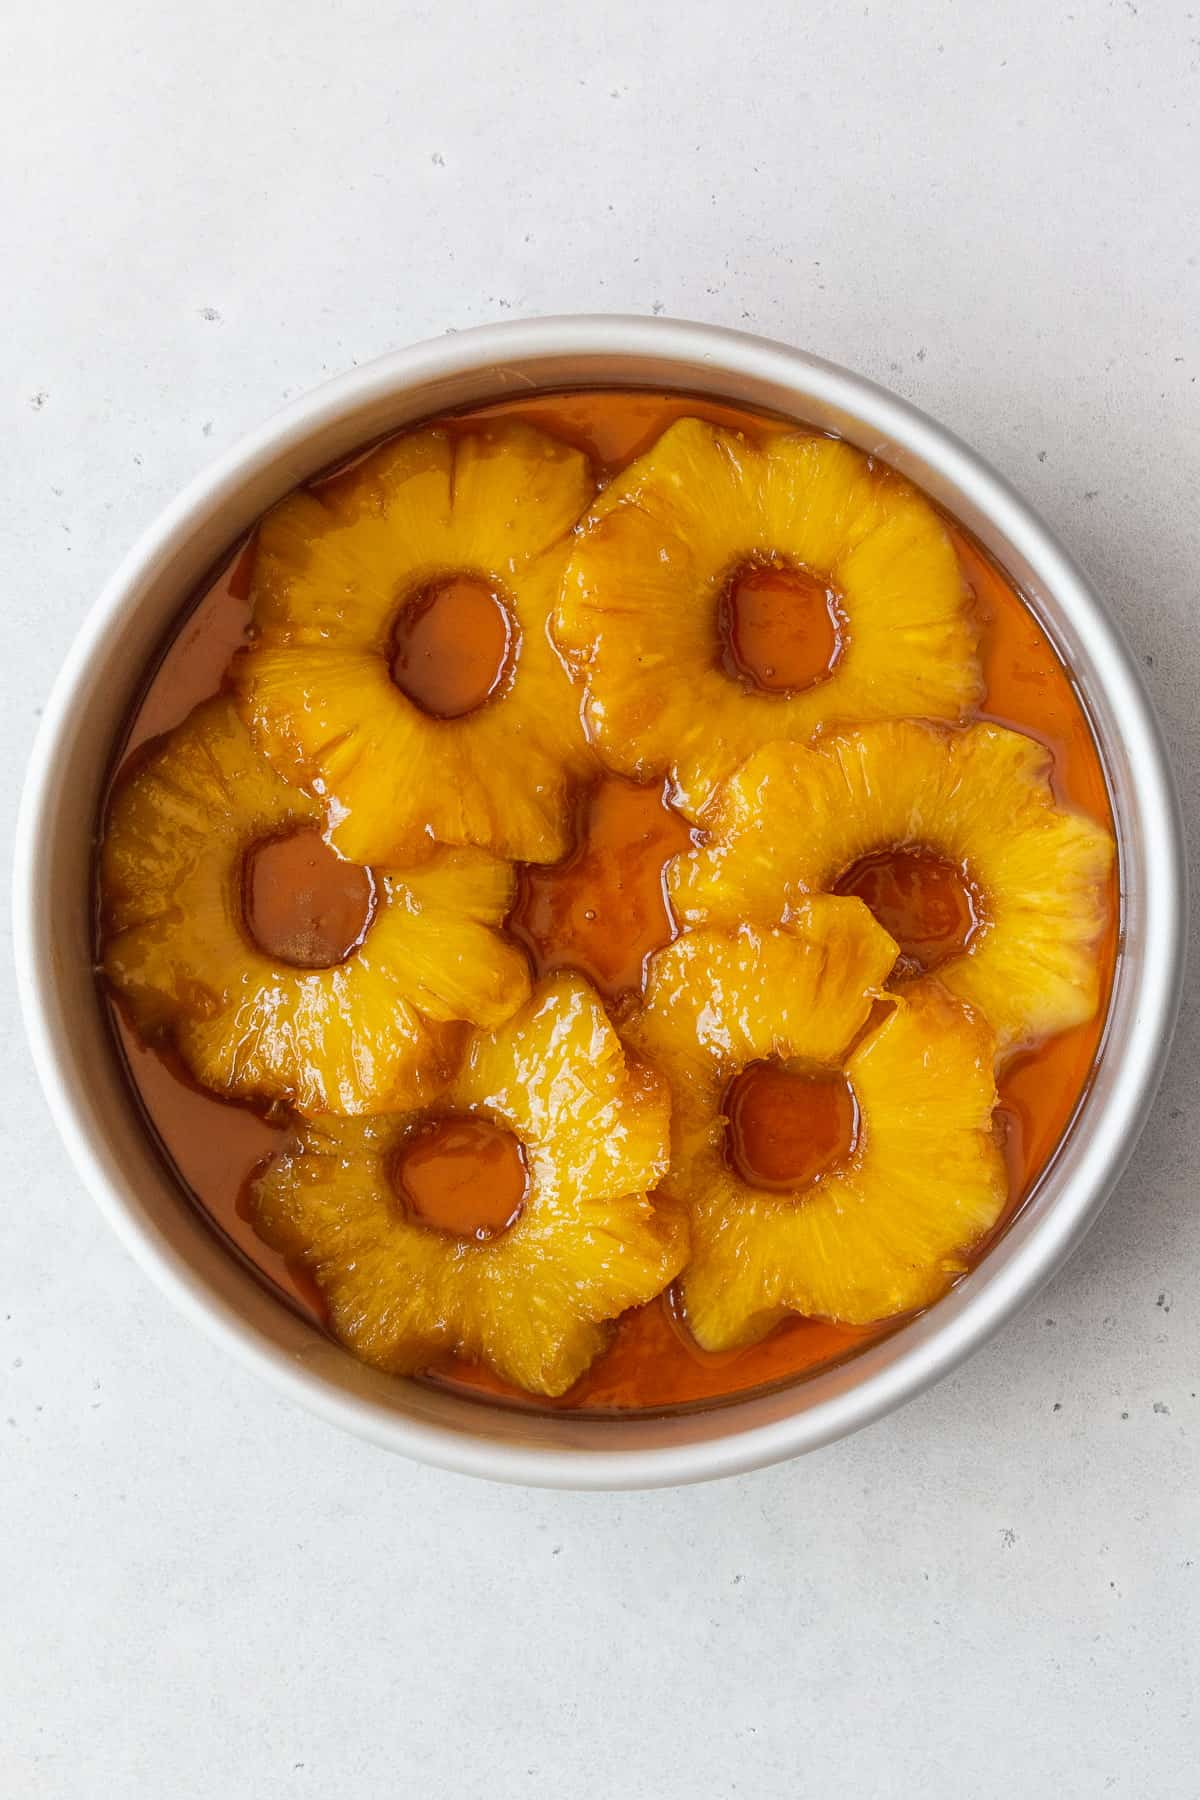 A cake pan of the brown sugar butter and pineapple rings in it.